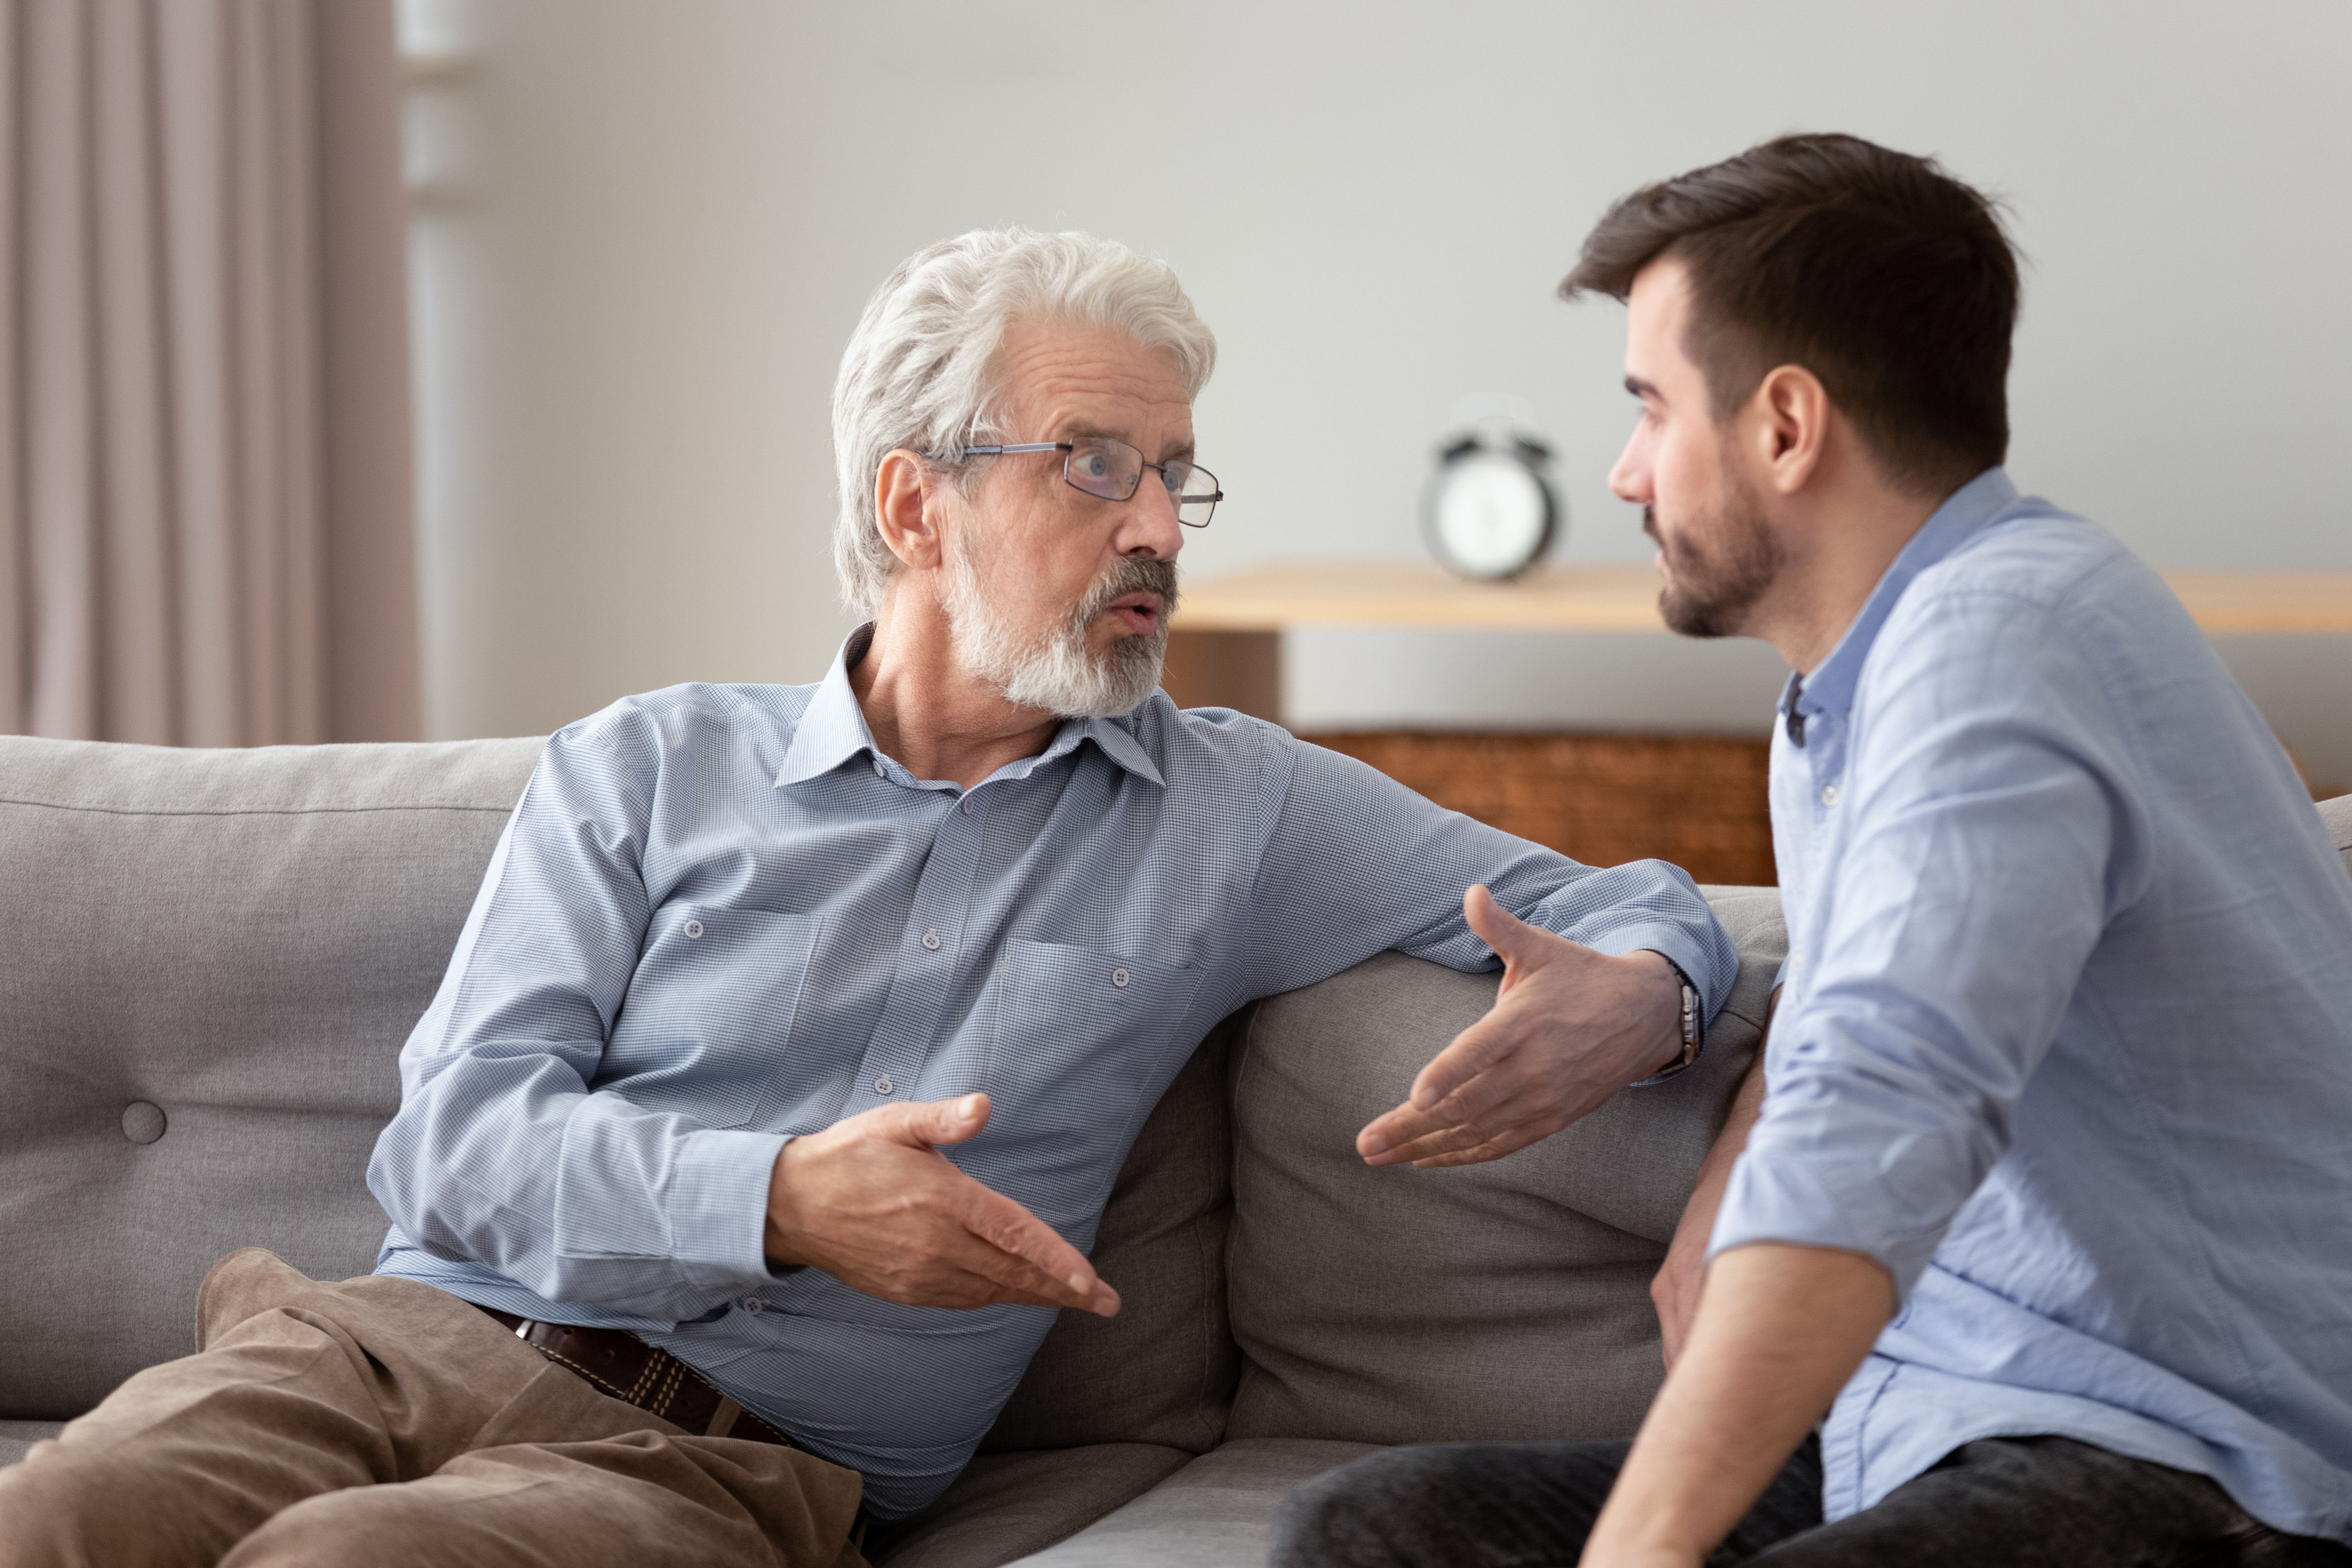 Old man tells something to a young man | Shutterstock